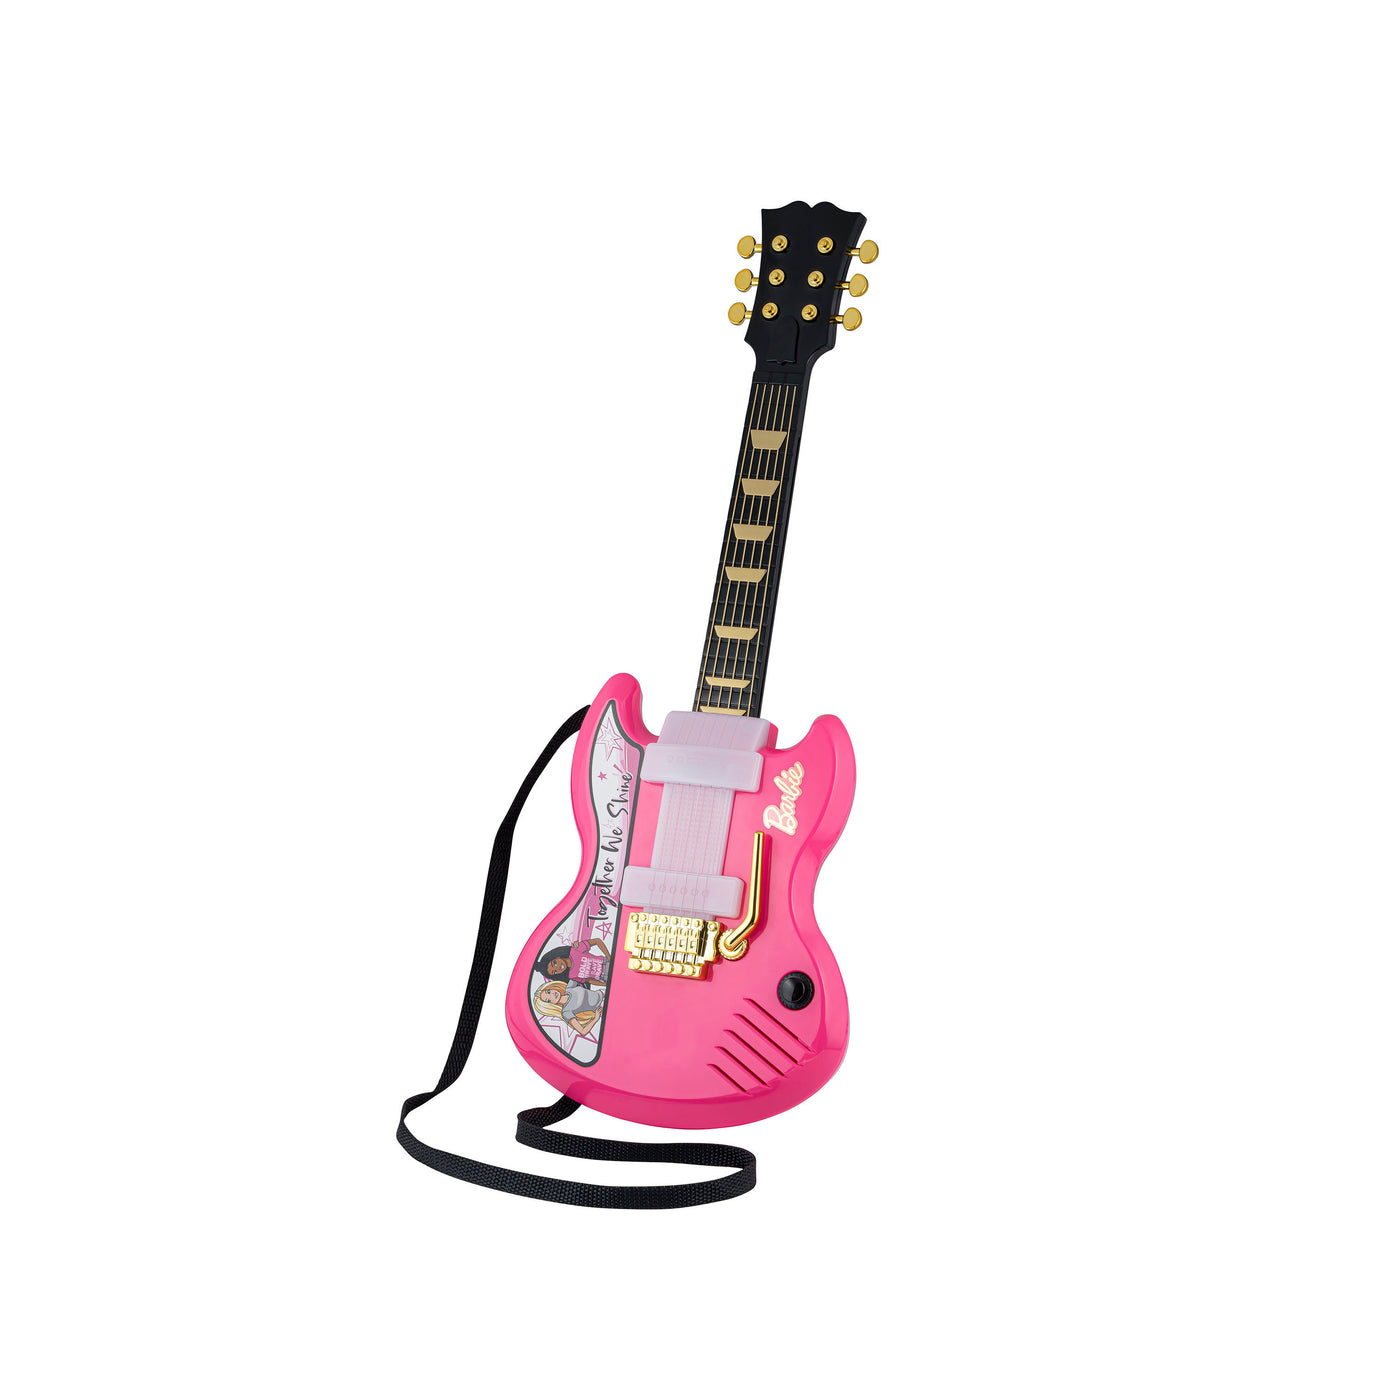 Barbie Toy Guitar with Built-in Music